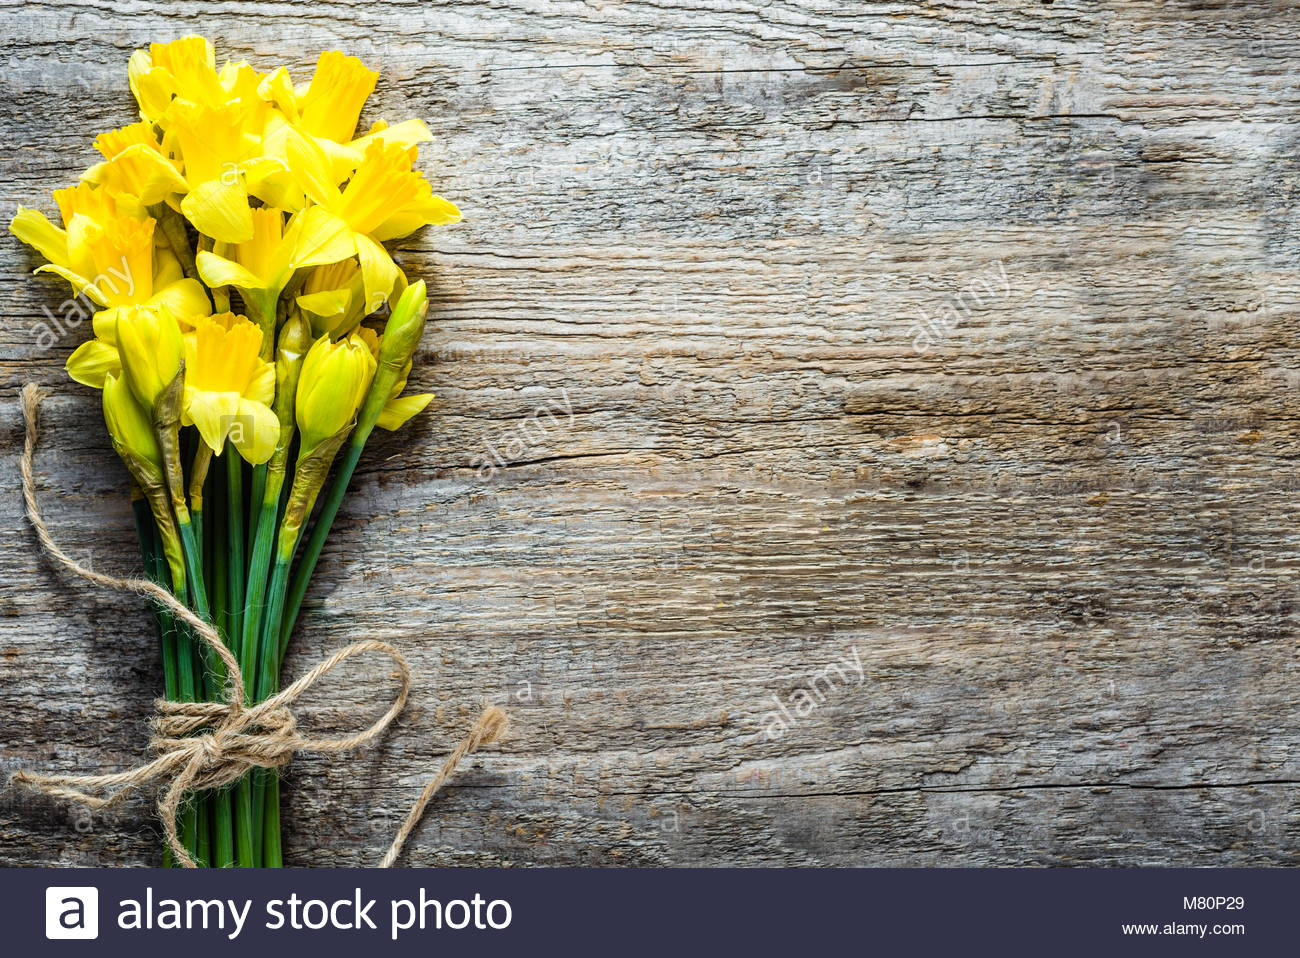 Spring backgrounds easter daffodils on wood Stock Photo